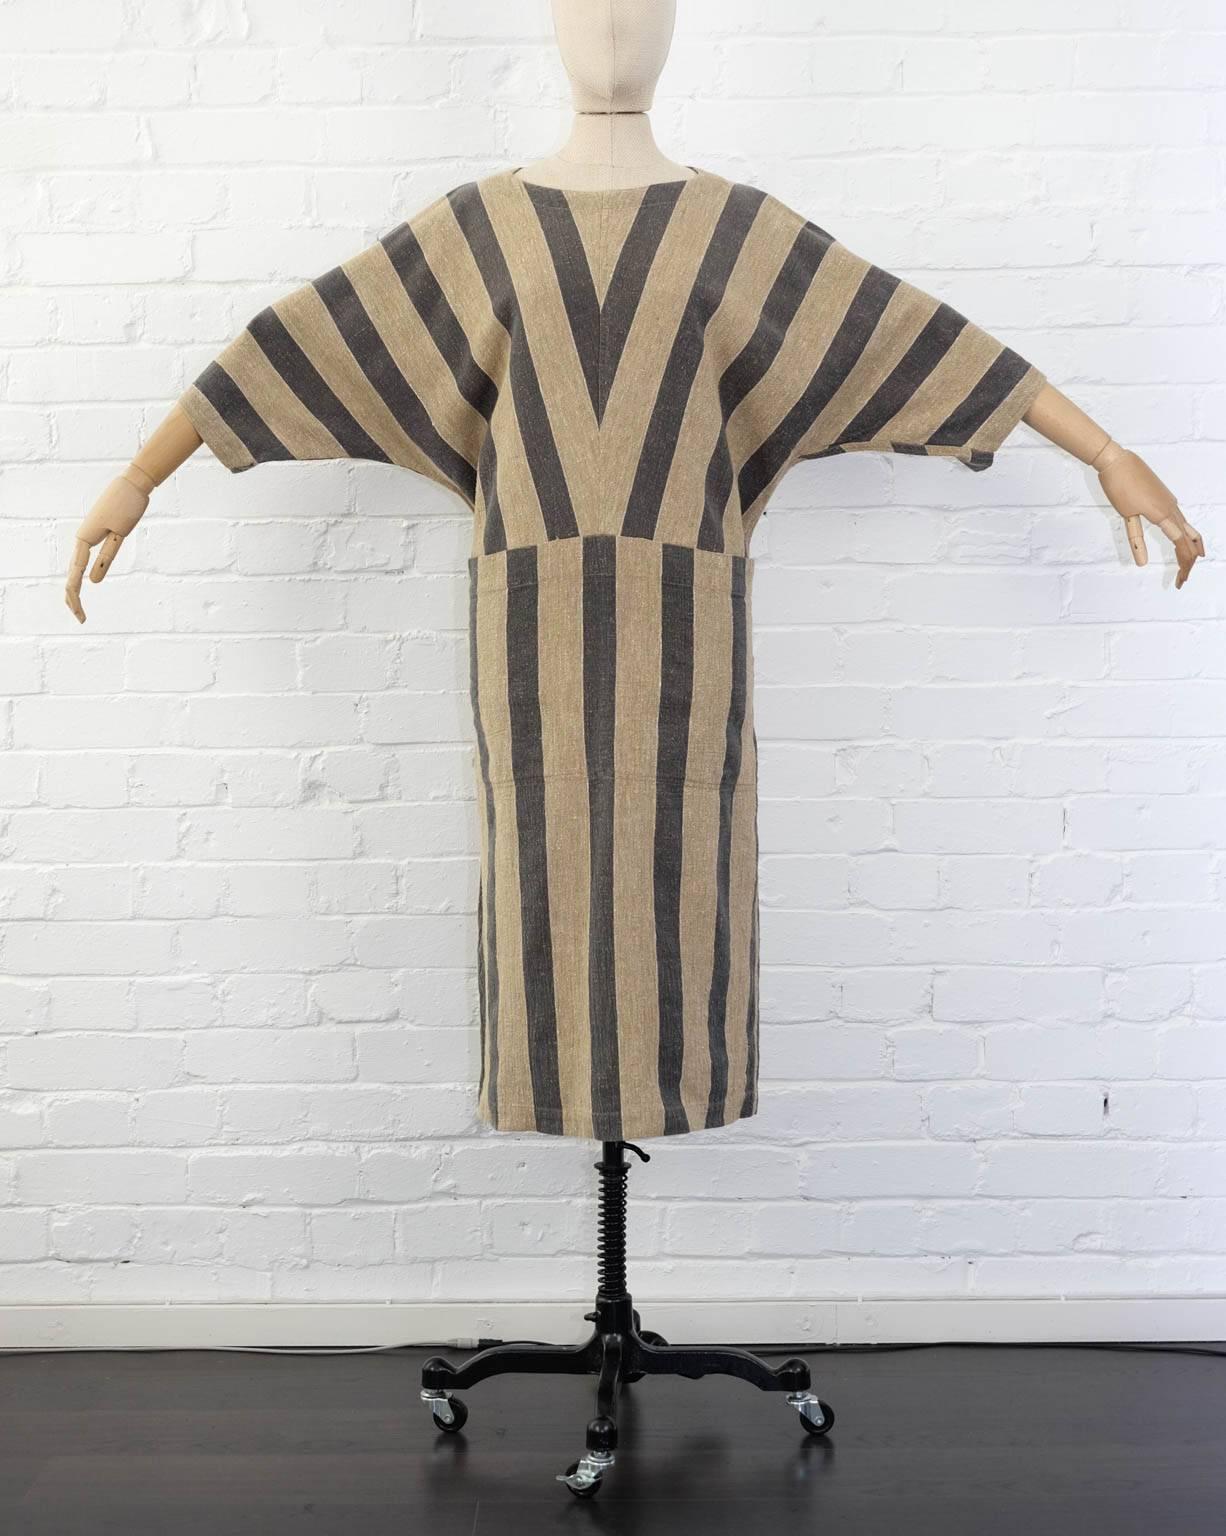 issey Miyake Plantation, circa 1980's khaki striped woven cotton dress with boat neck and two deep front pockets.

Japan: Medium

50% linen 50%cotton 

Shoulder to Shoulder 42cm Waist 108cm, Length 112cm